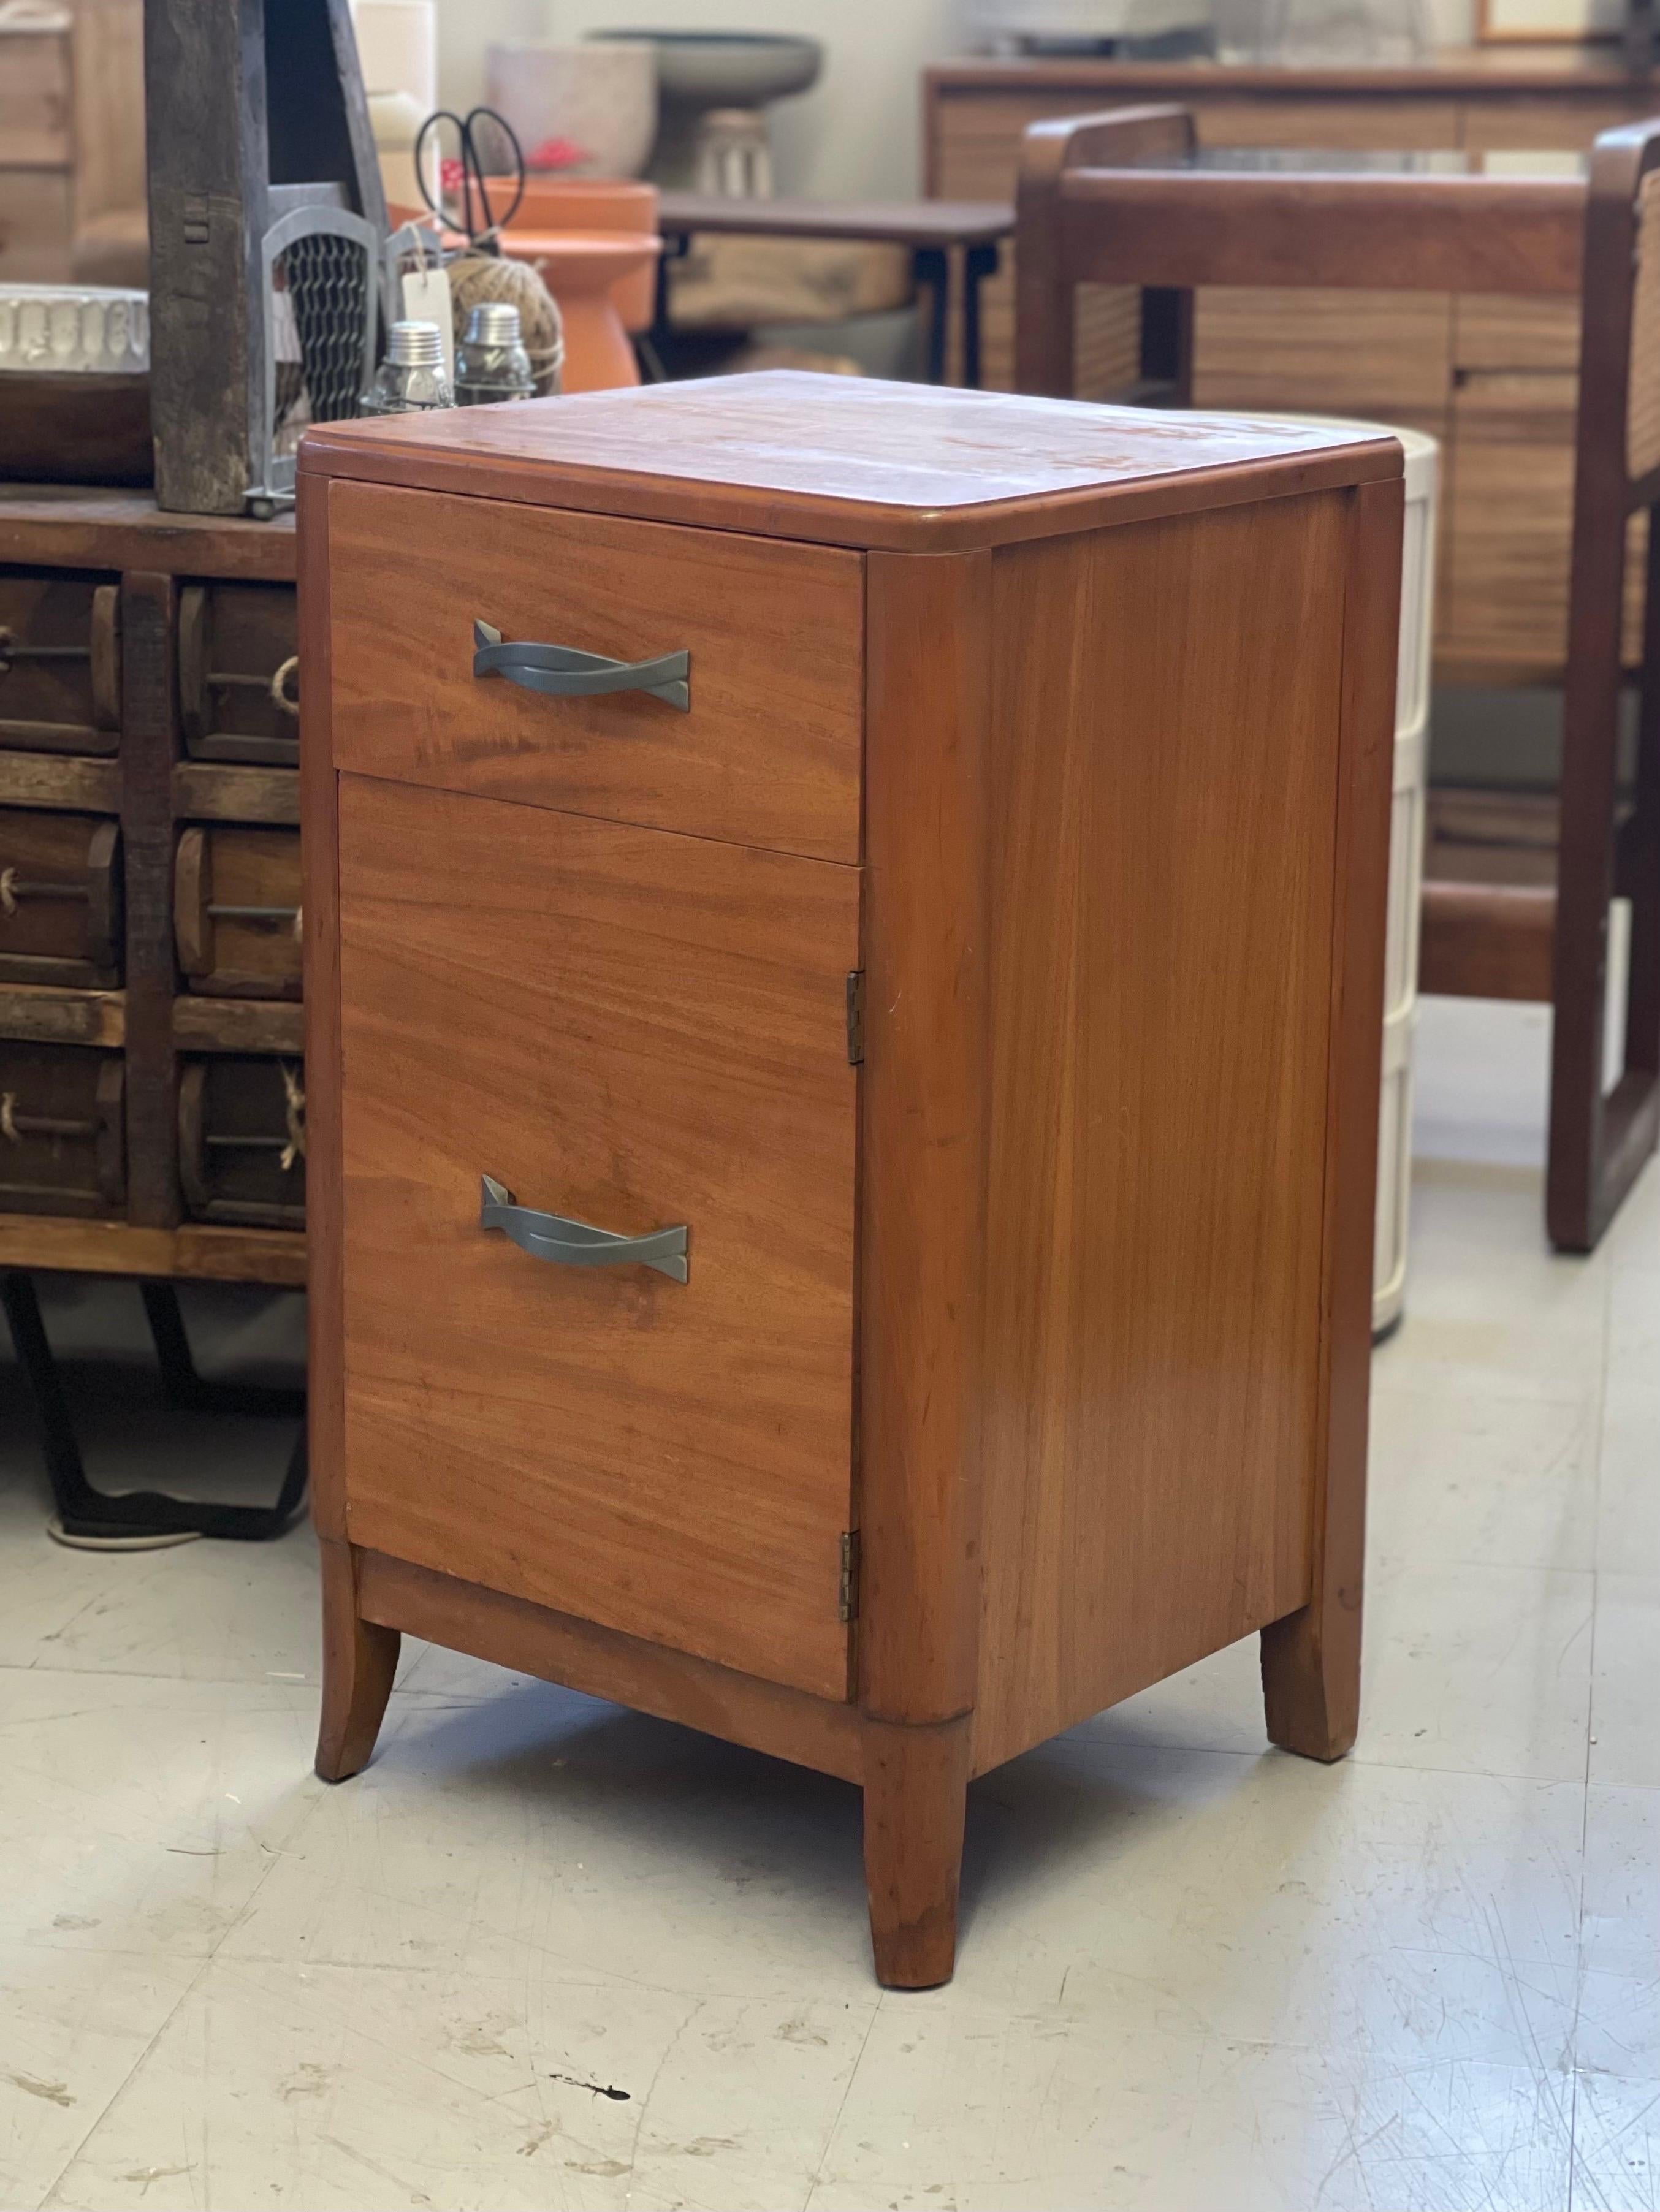 Vintage Mid-Century Modern Accent Table Dovetail Drawers Circa 1950s - 1970s. In Good Condition For Sale In Seattle, WA